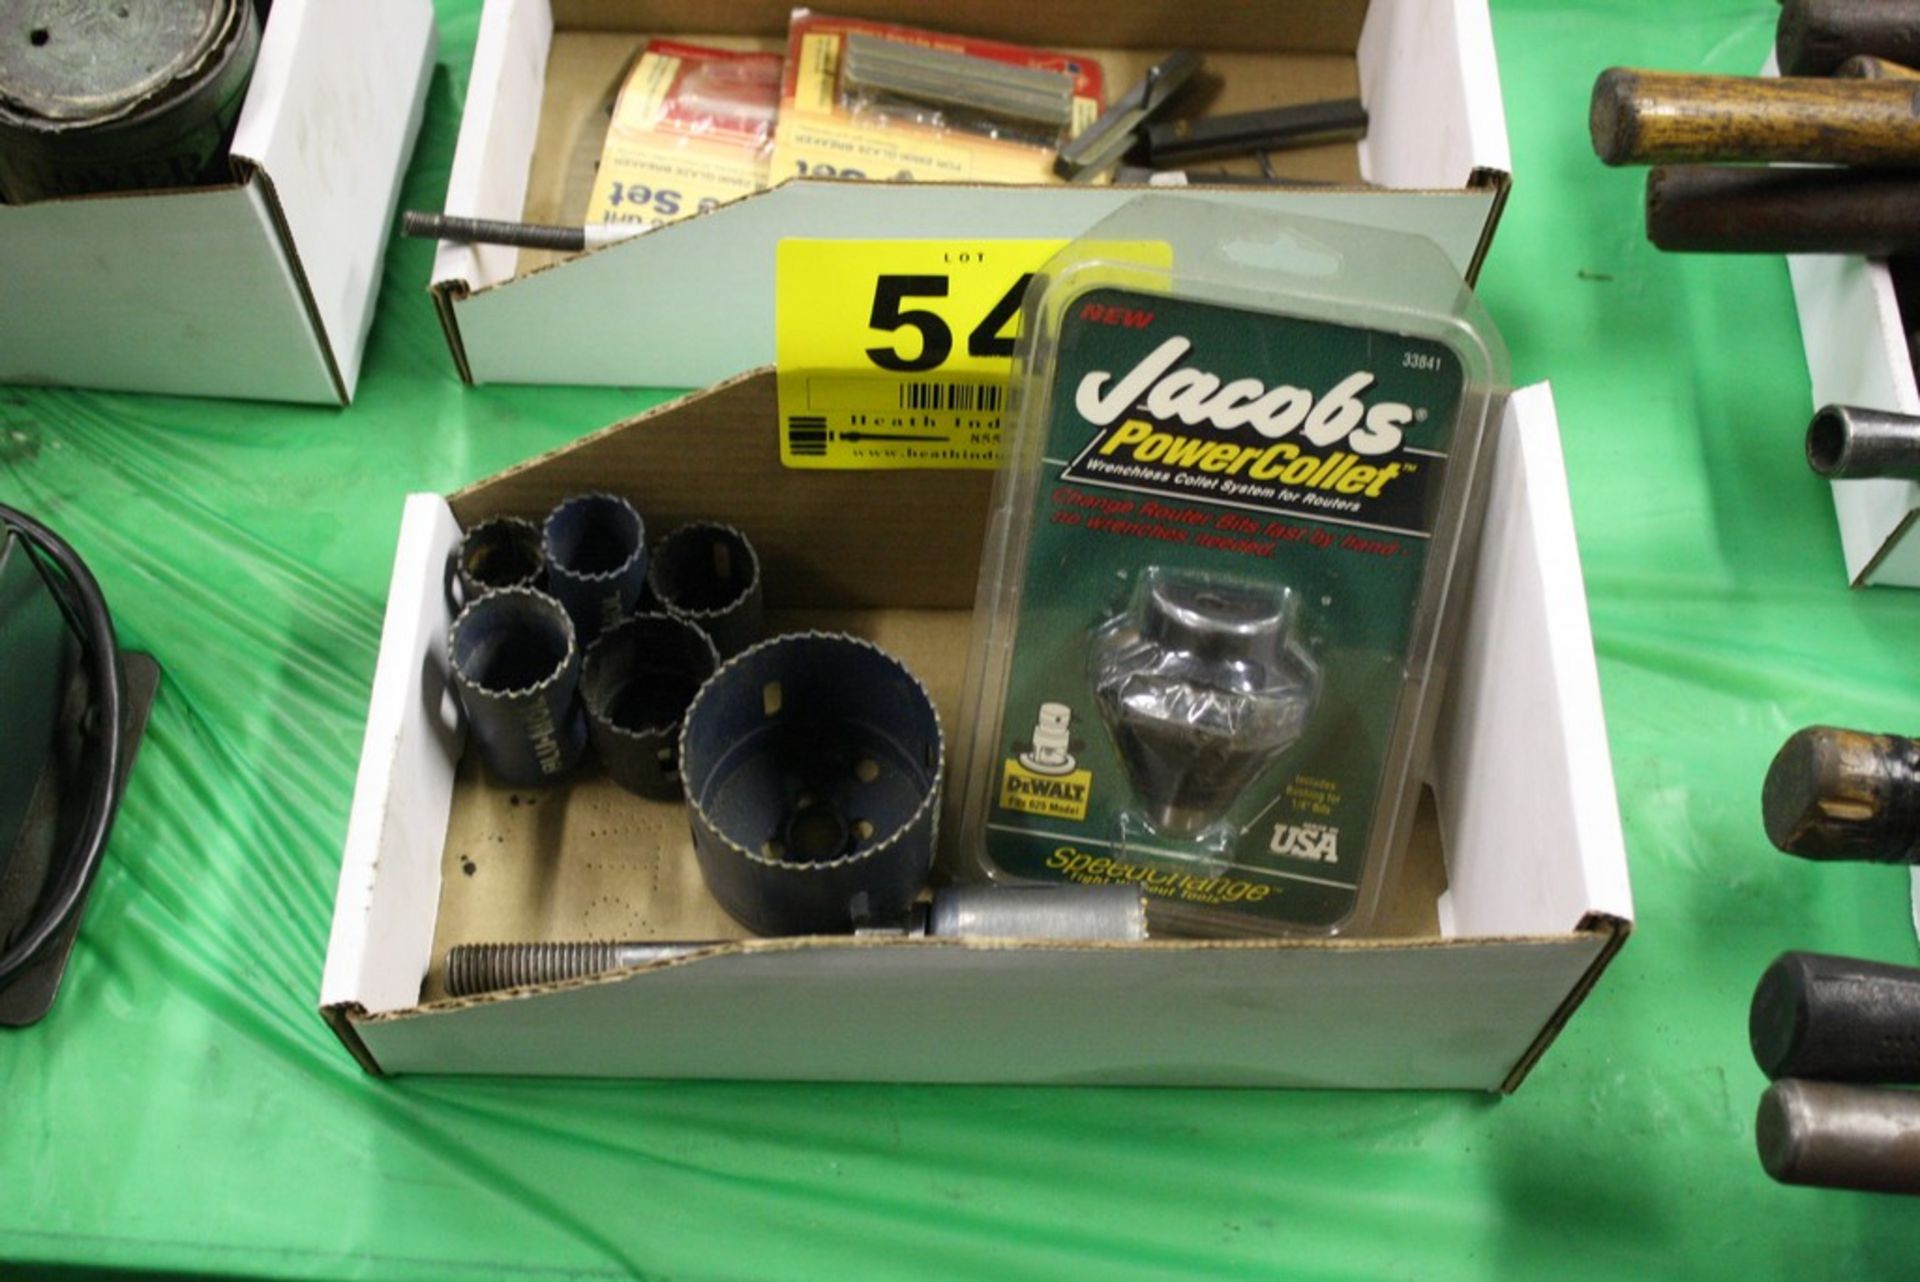 LOT: ASSORTED HOLE SAWS & JACOBS POWER COLLET